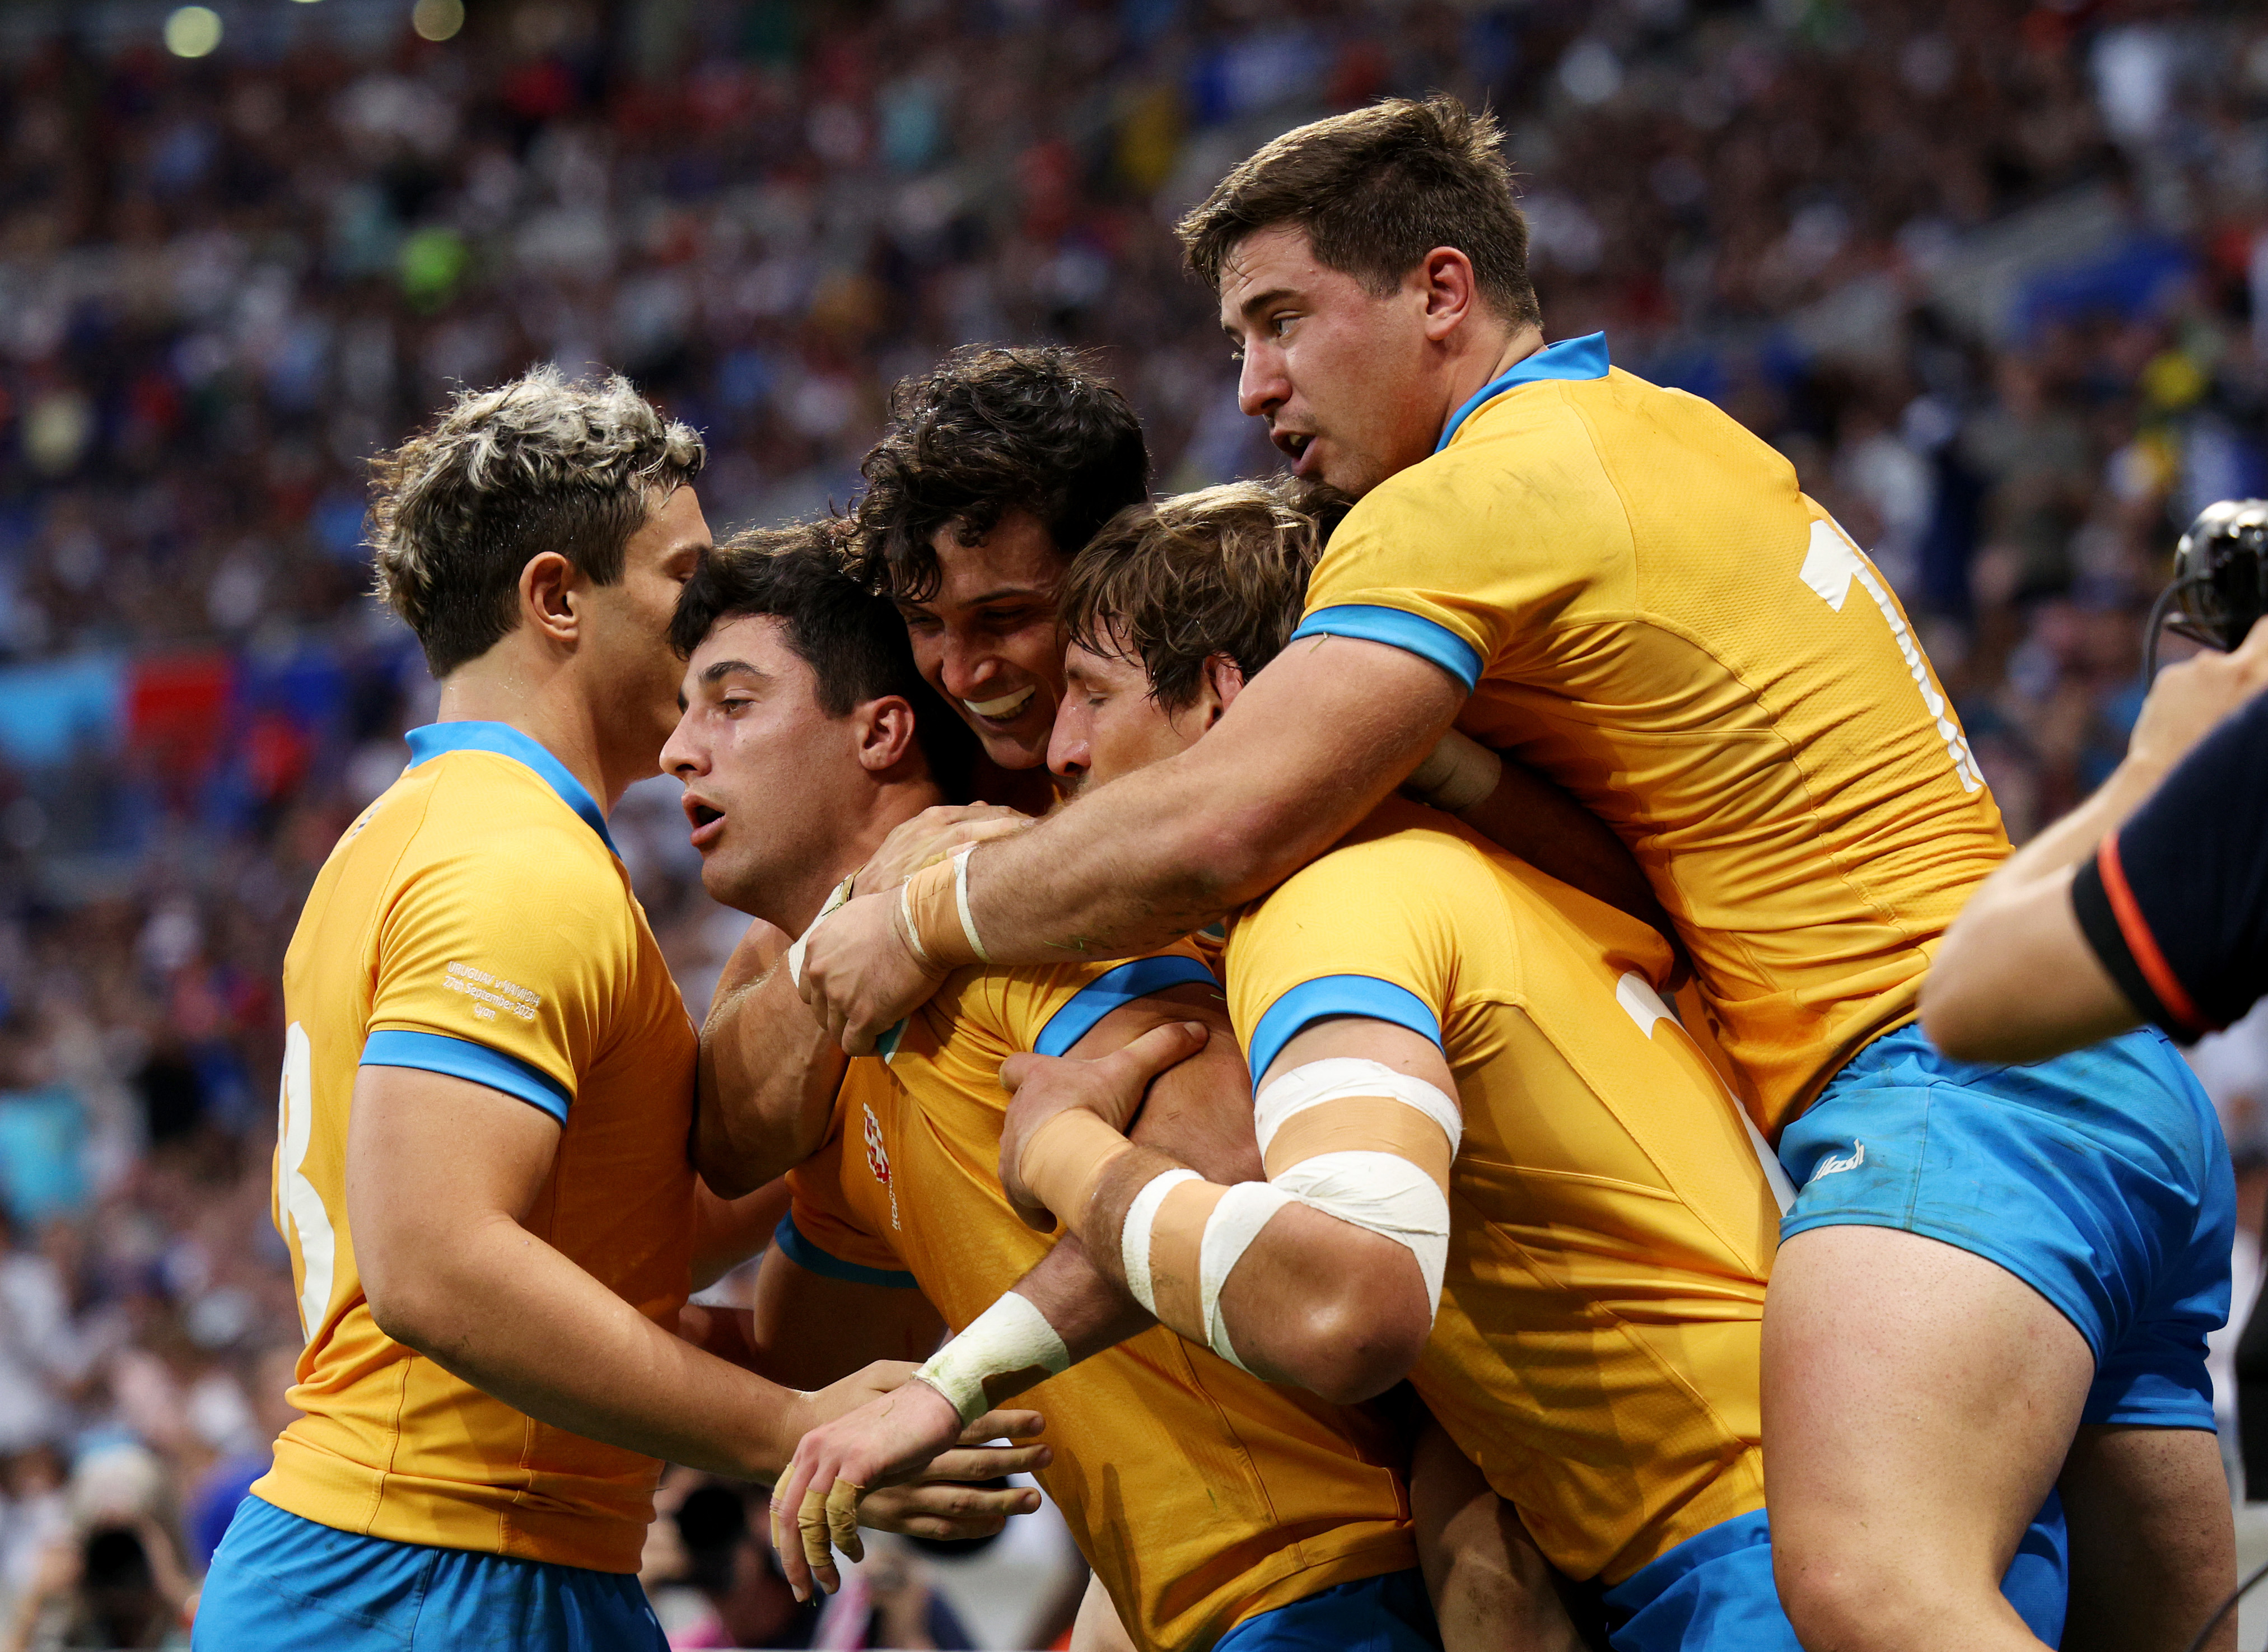 Bautista Basso of Uruguay celebrates with teammates after scoring his team's fifth try during the Rugby World Cup France 2023 match between Uruguay and Namibia at Parc Olympique on September 27, 2023 in Lyon, France. (Photo by Adam Pretty - World Rugby/World Rugby via Getty Images)